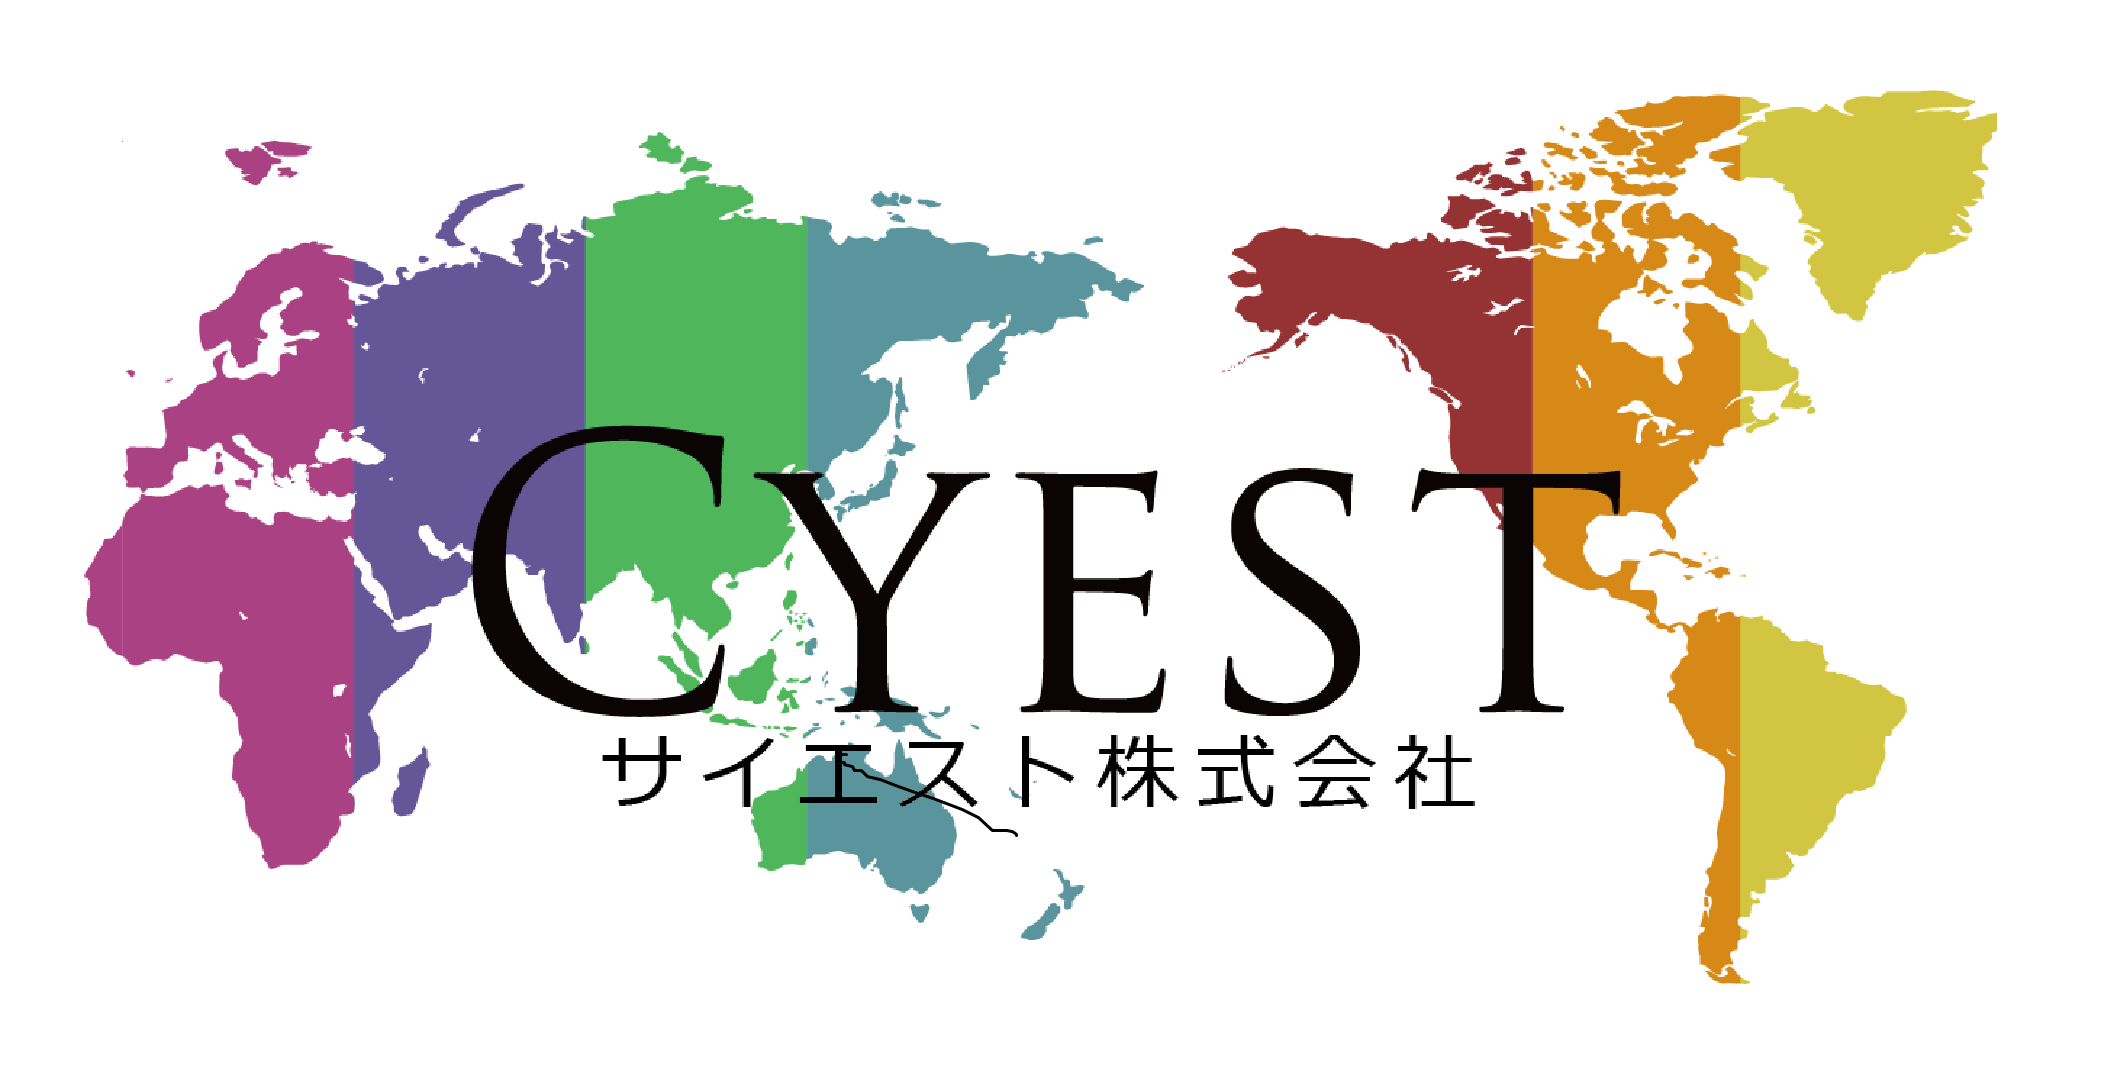 Cyest.png